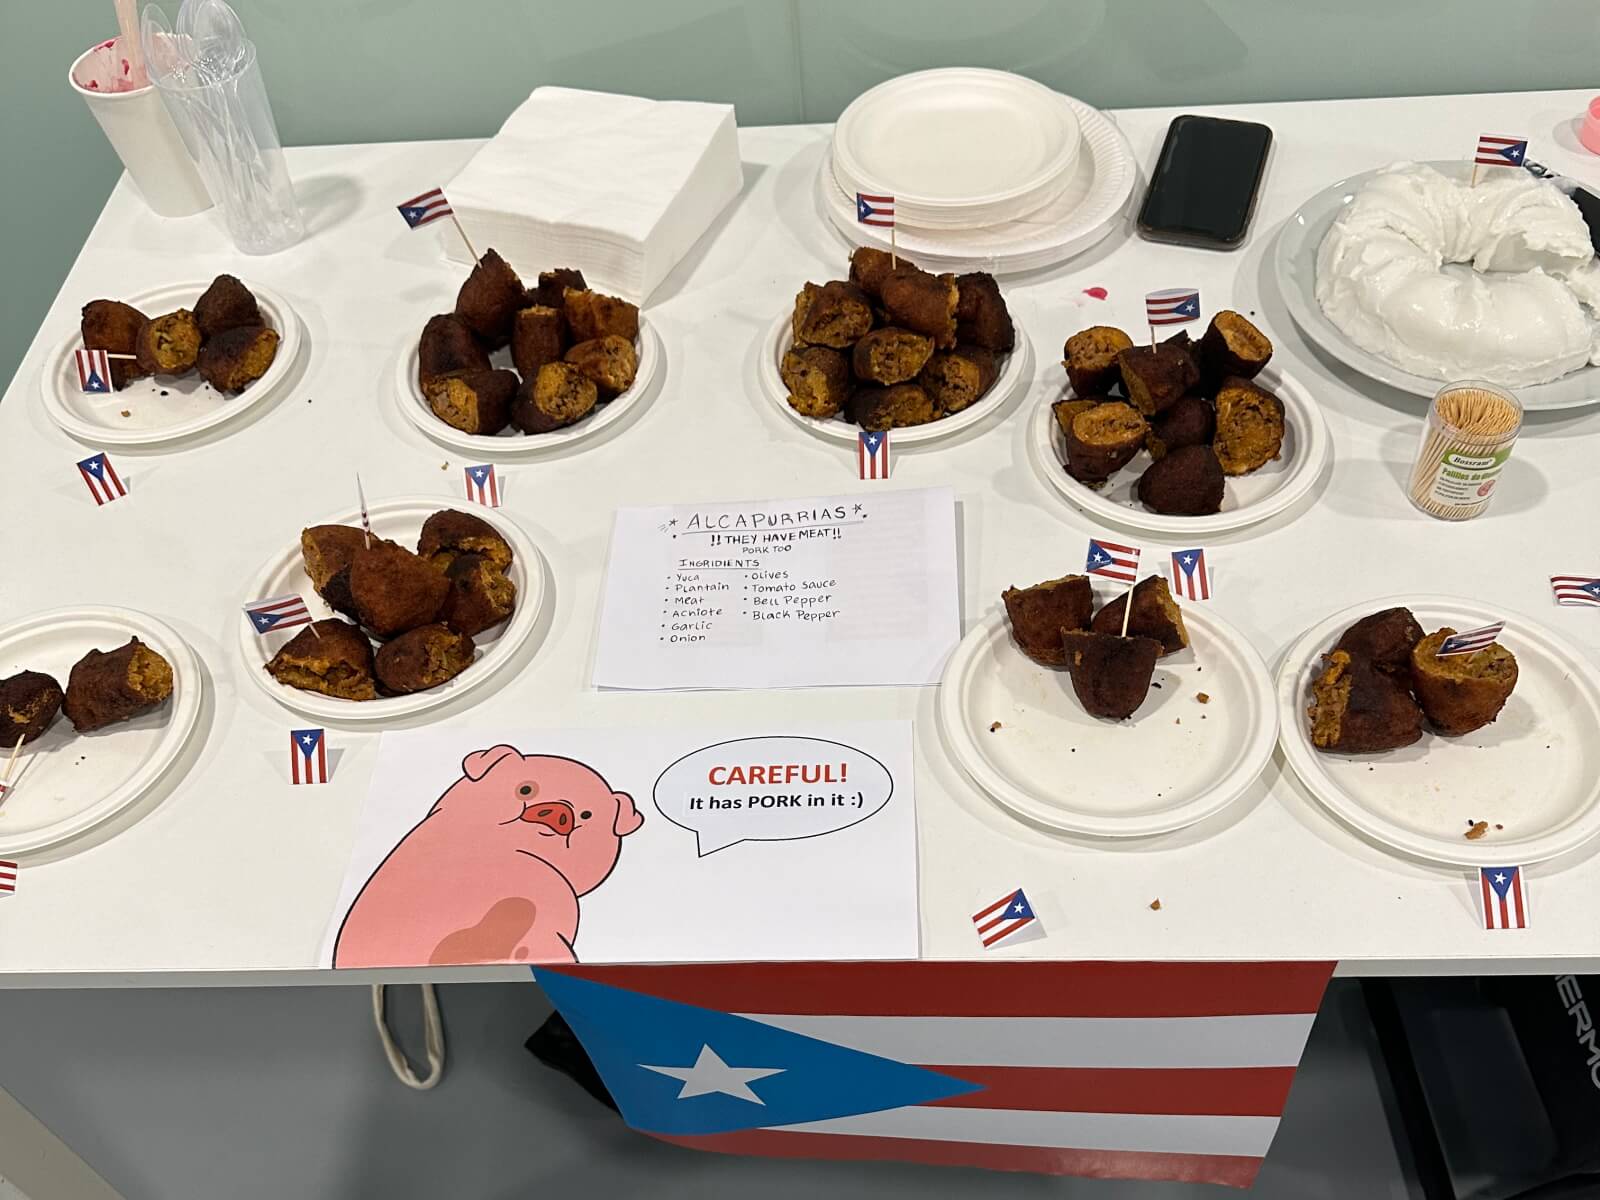 Traditional Puerto Rico dish, with flags on each of the servings and a warning that it contains pork.